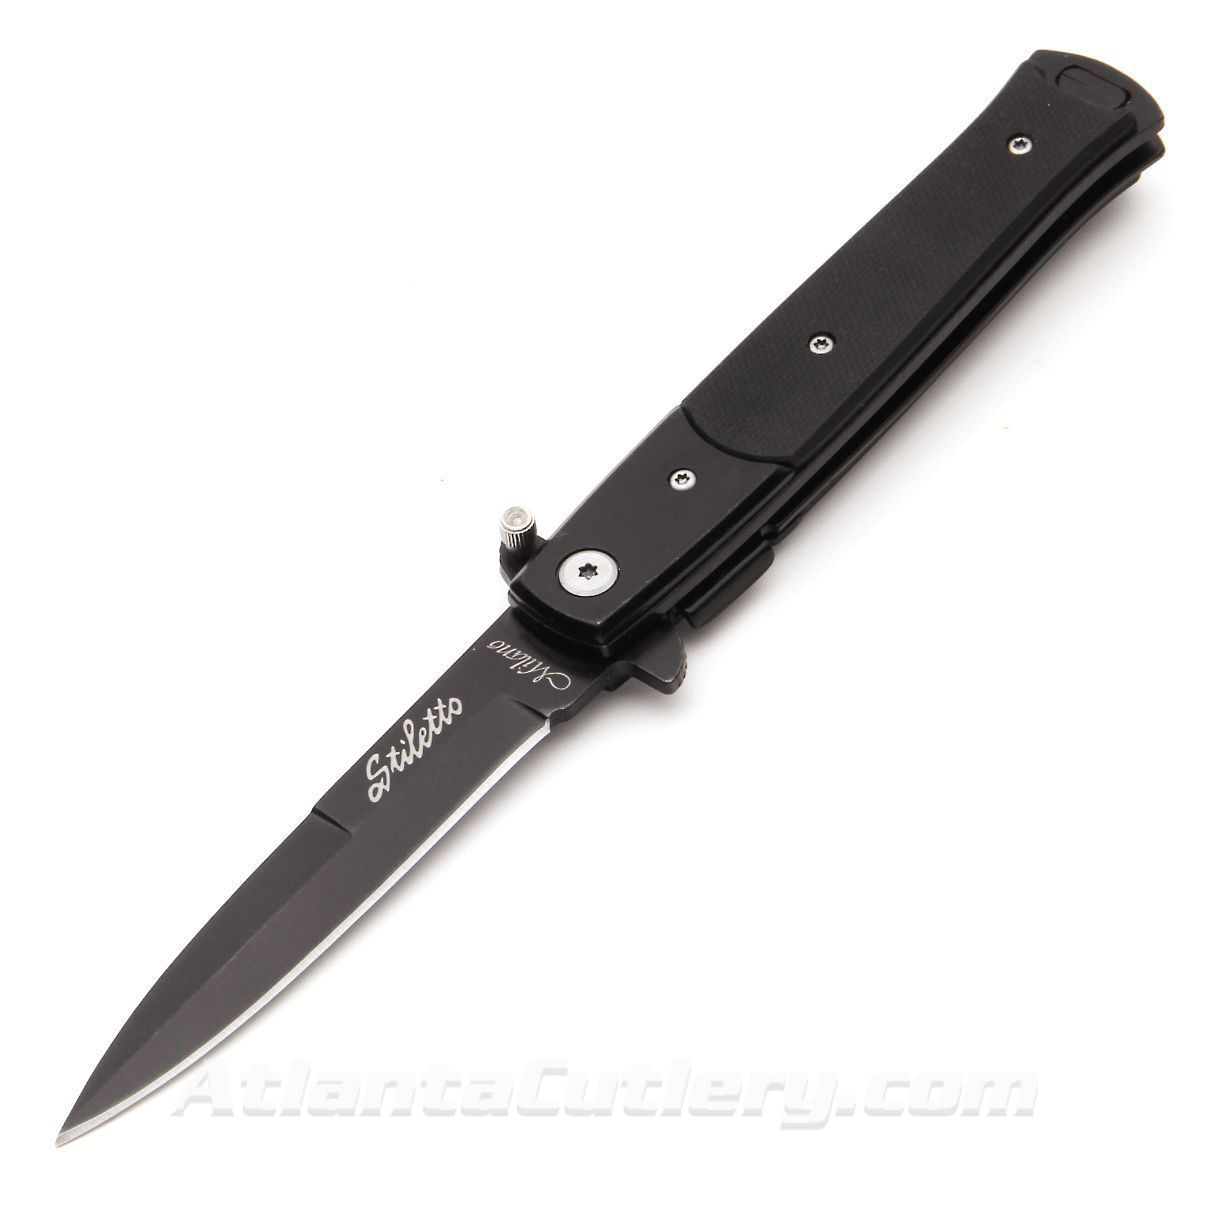 Practical Stiletto pocket knife with G10 scales, single edge 1045 steel blade, pocket clip, liner lock, thumb extension